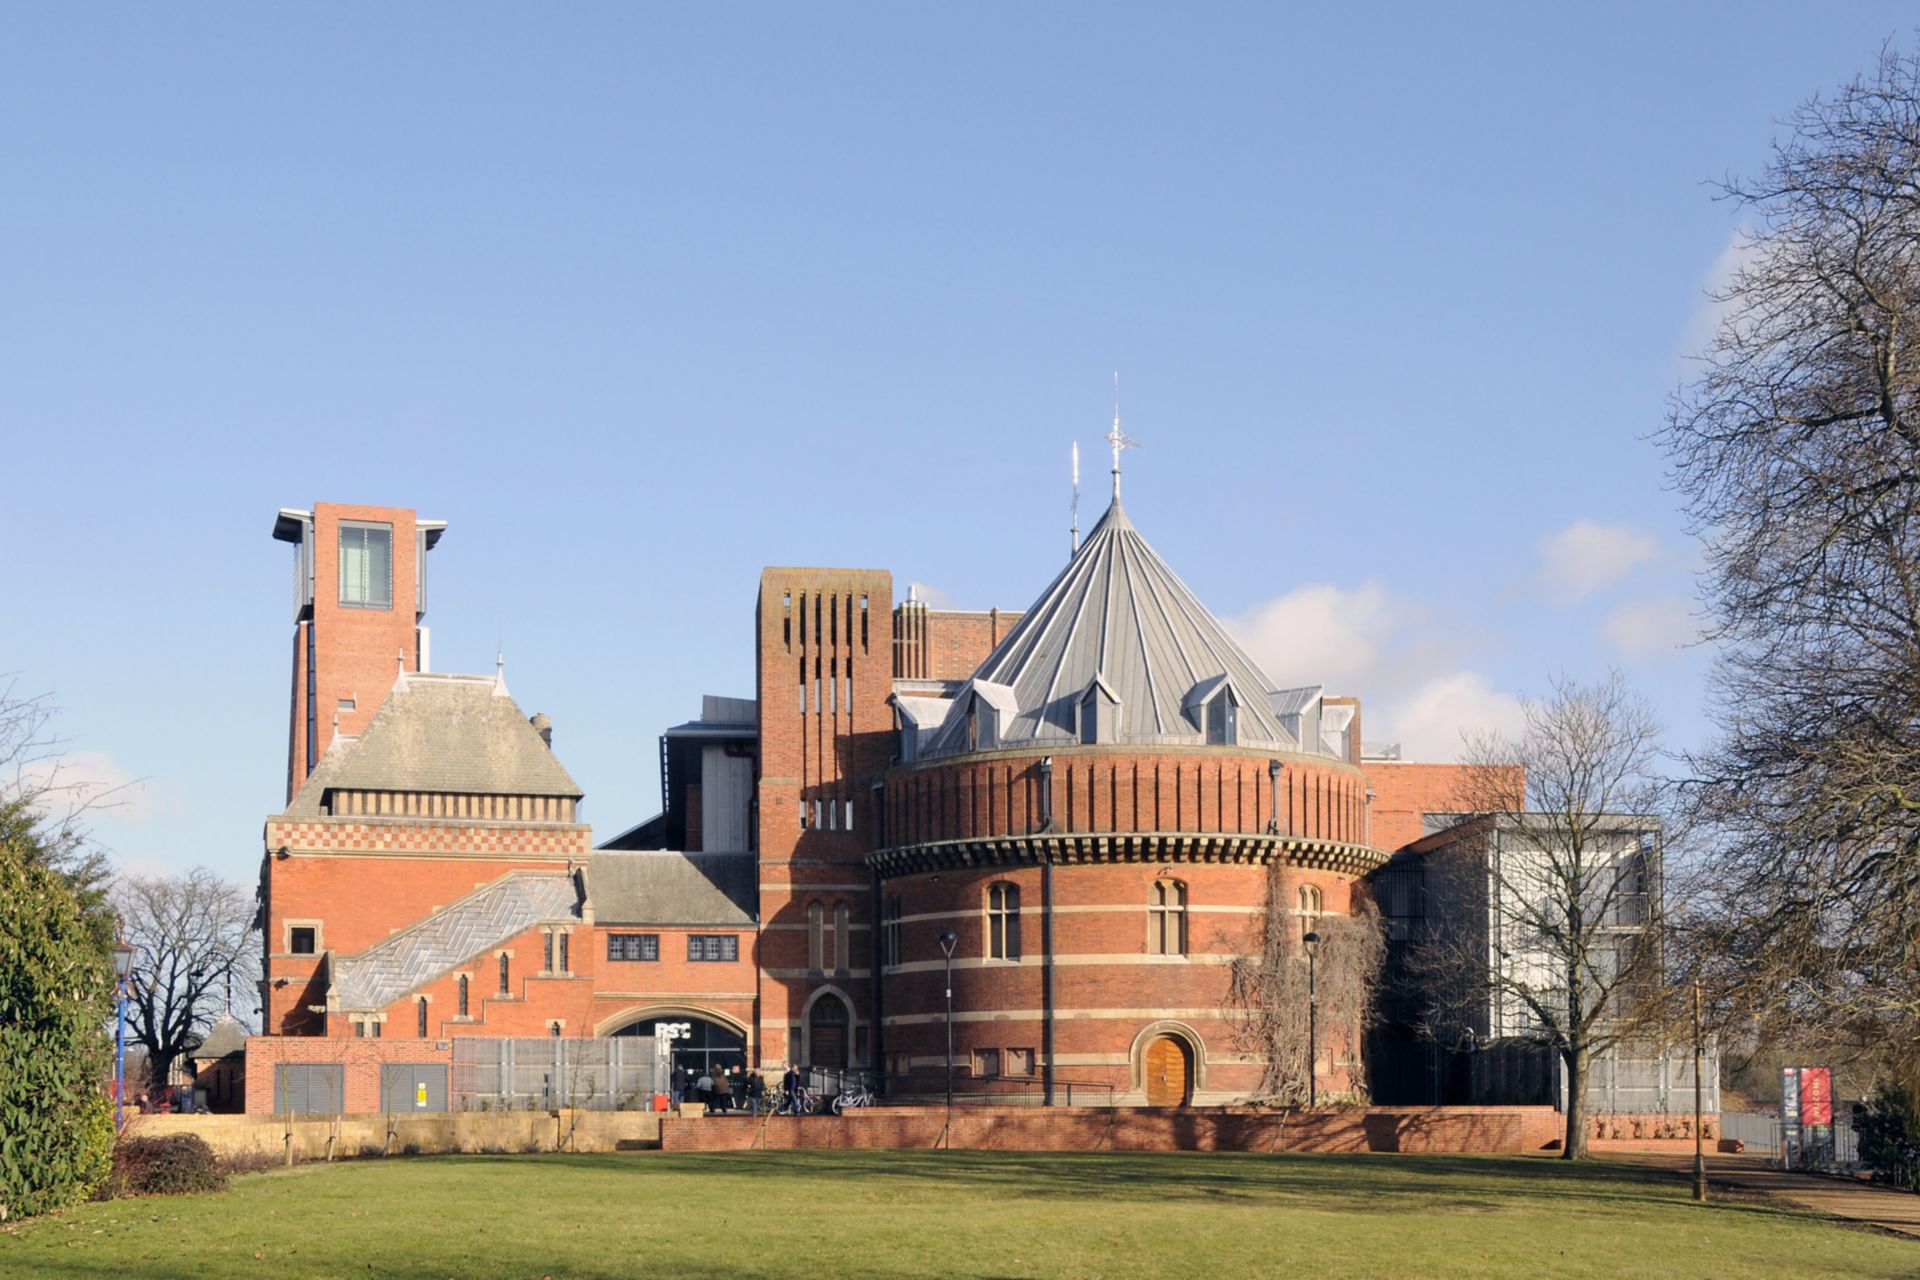 Royal Shakespeare Theatre in the UK